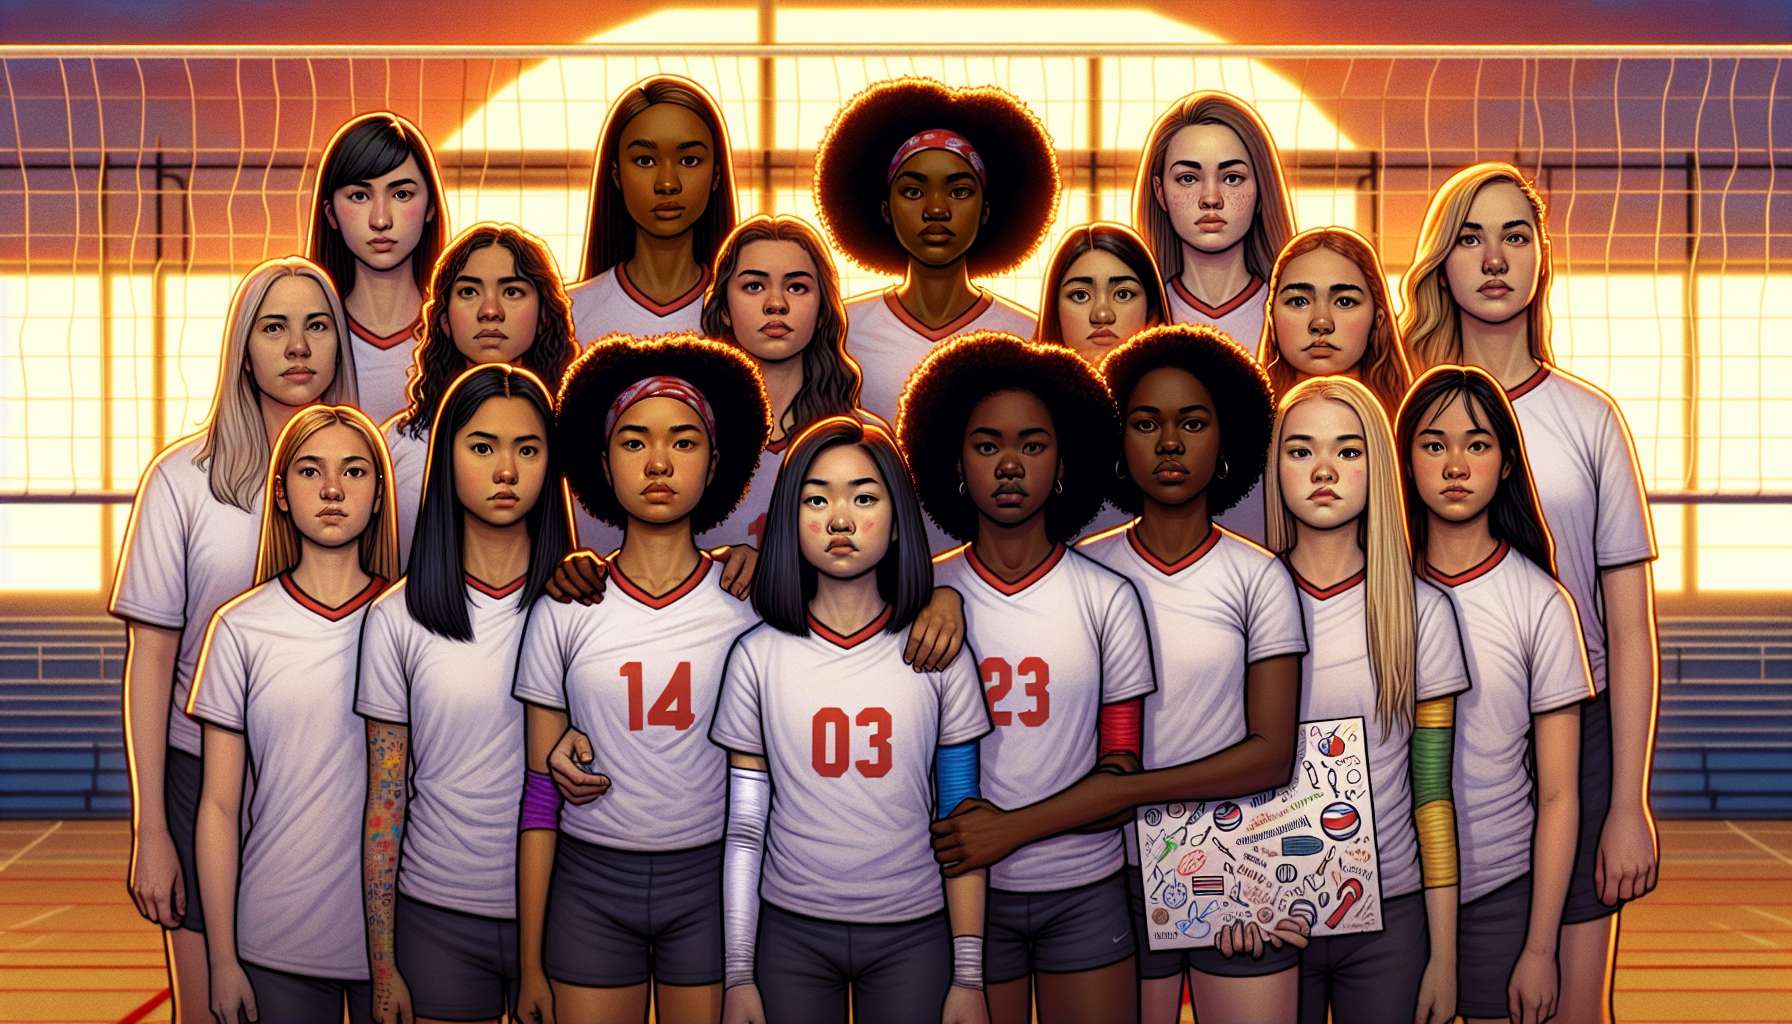 Illustration of Wisconsin volleyball team members showing unity and resilience despite the leaked images